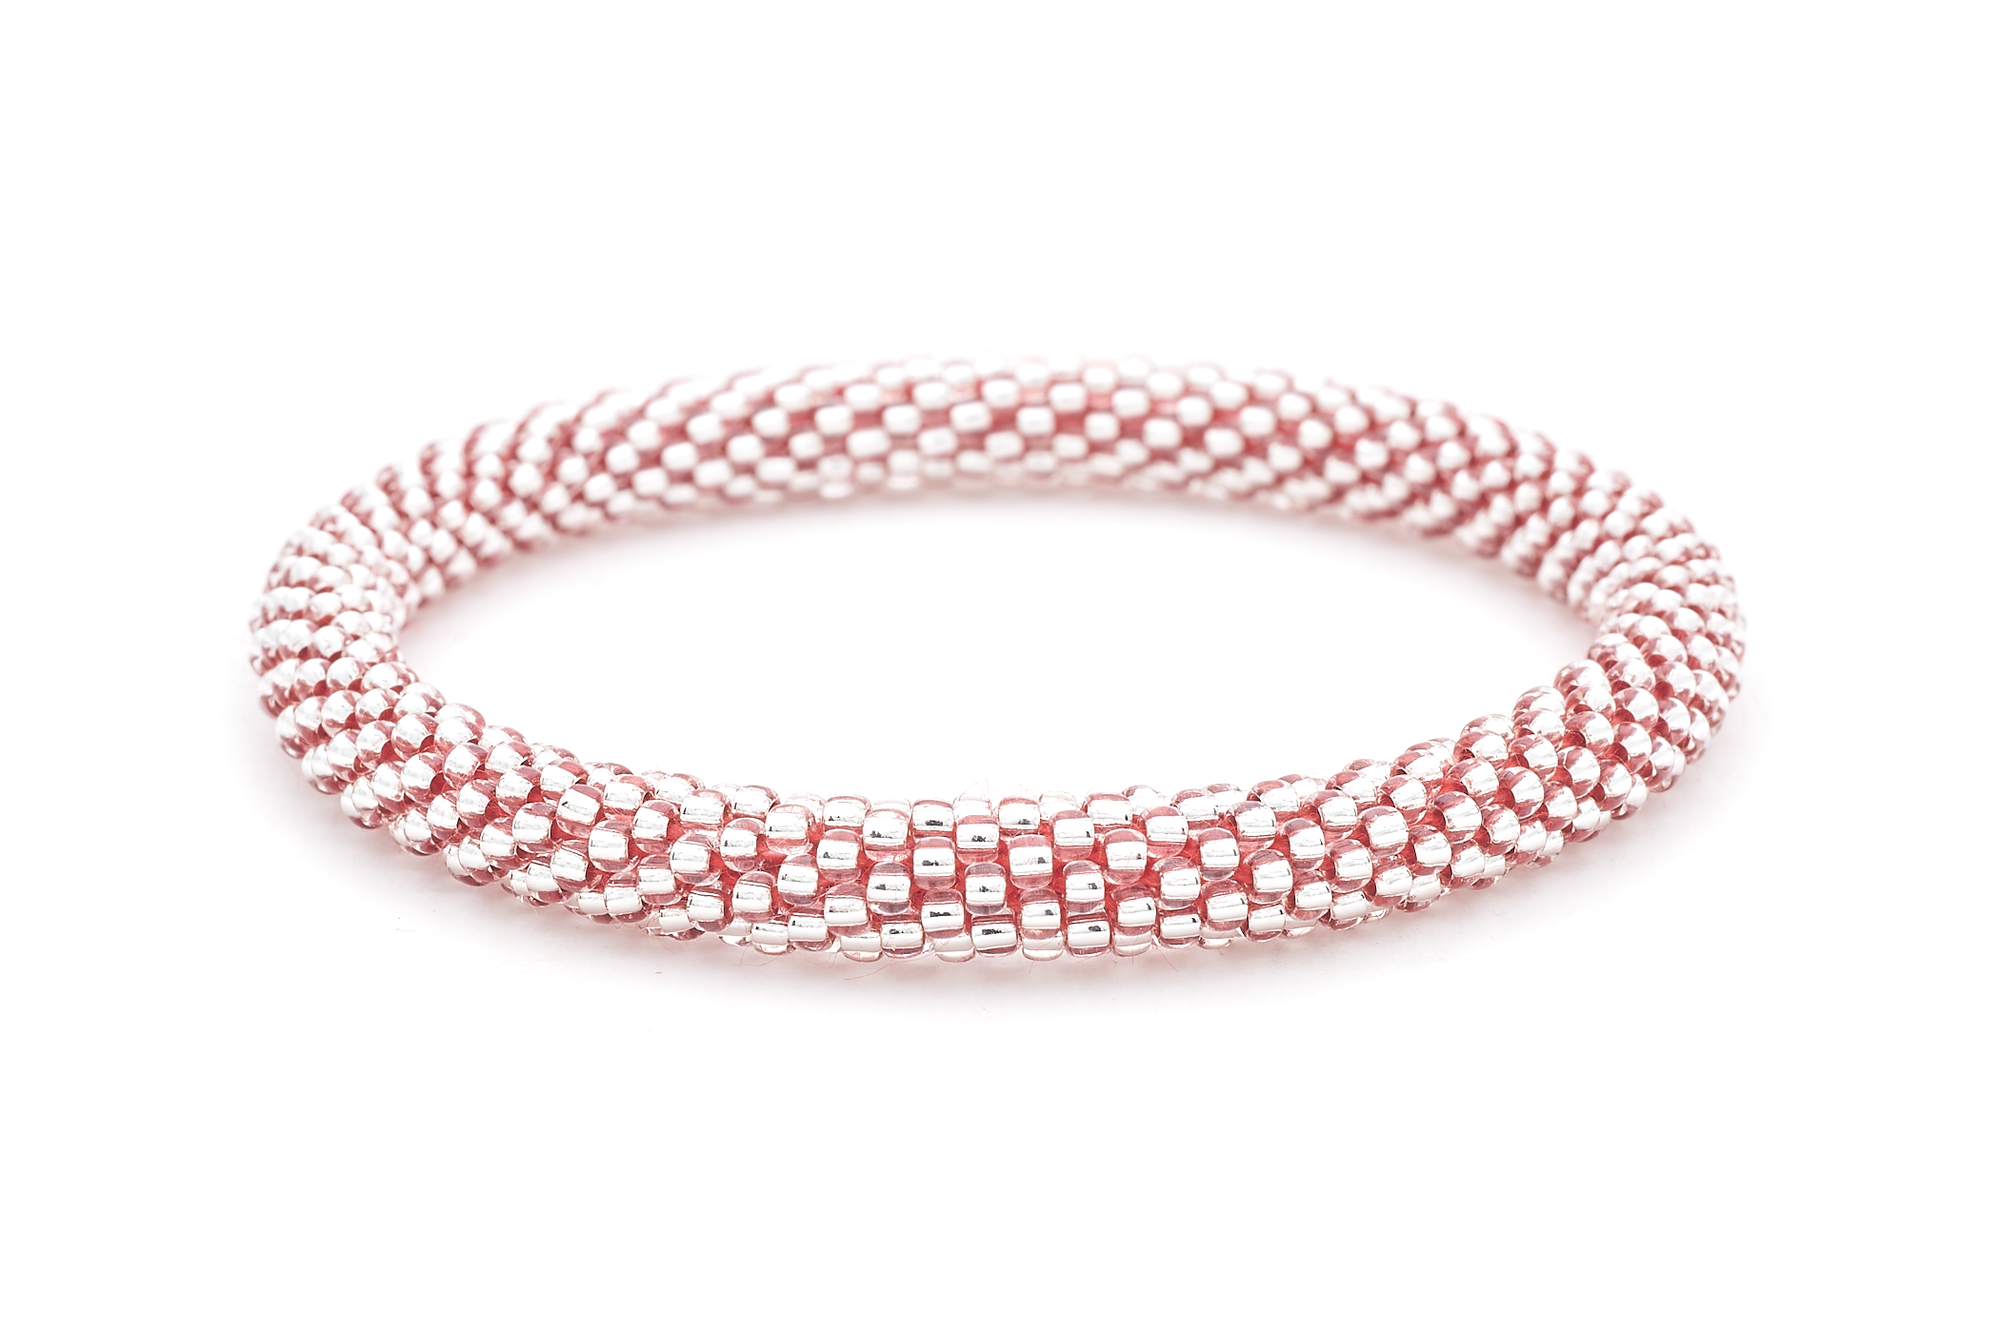 Sashka Co. Extended 8" Bracelet Clear Bead with Red Thread Red Diamond Sparkle Bracelet - Extended 8"